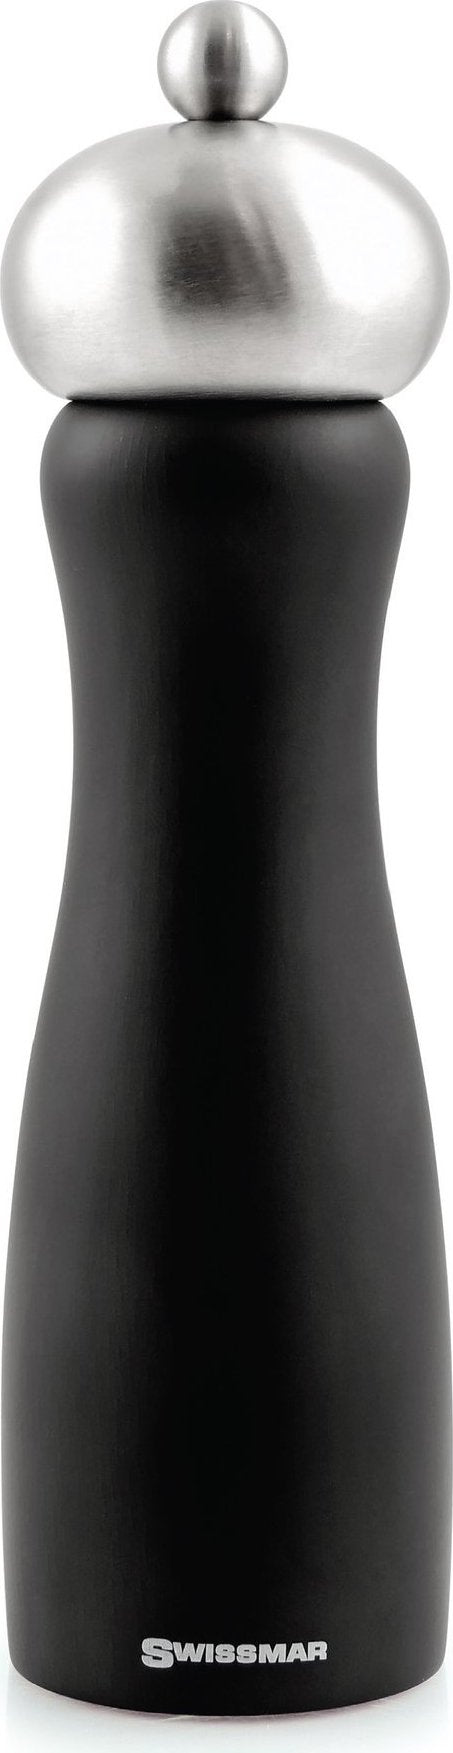 Swissmar - Classic Belle 8" Black Matte Pepper Mill with Stainless Steel Top - SMP2001MB